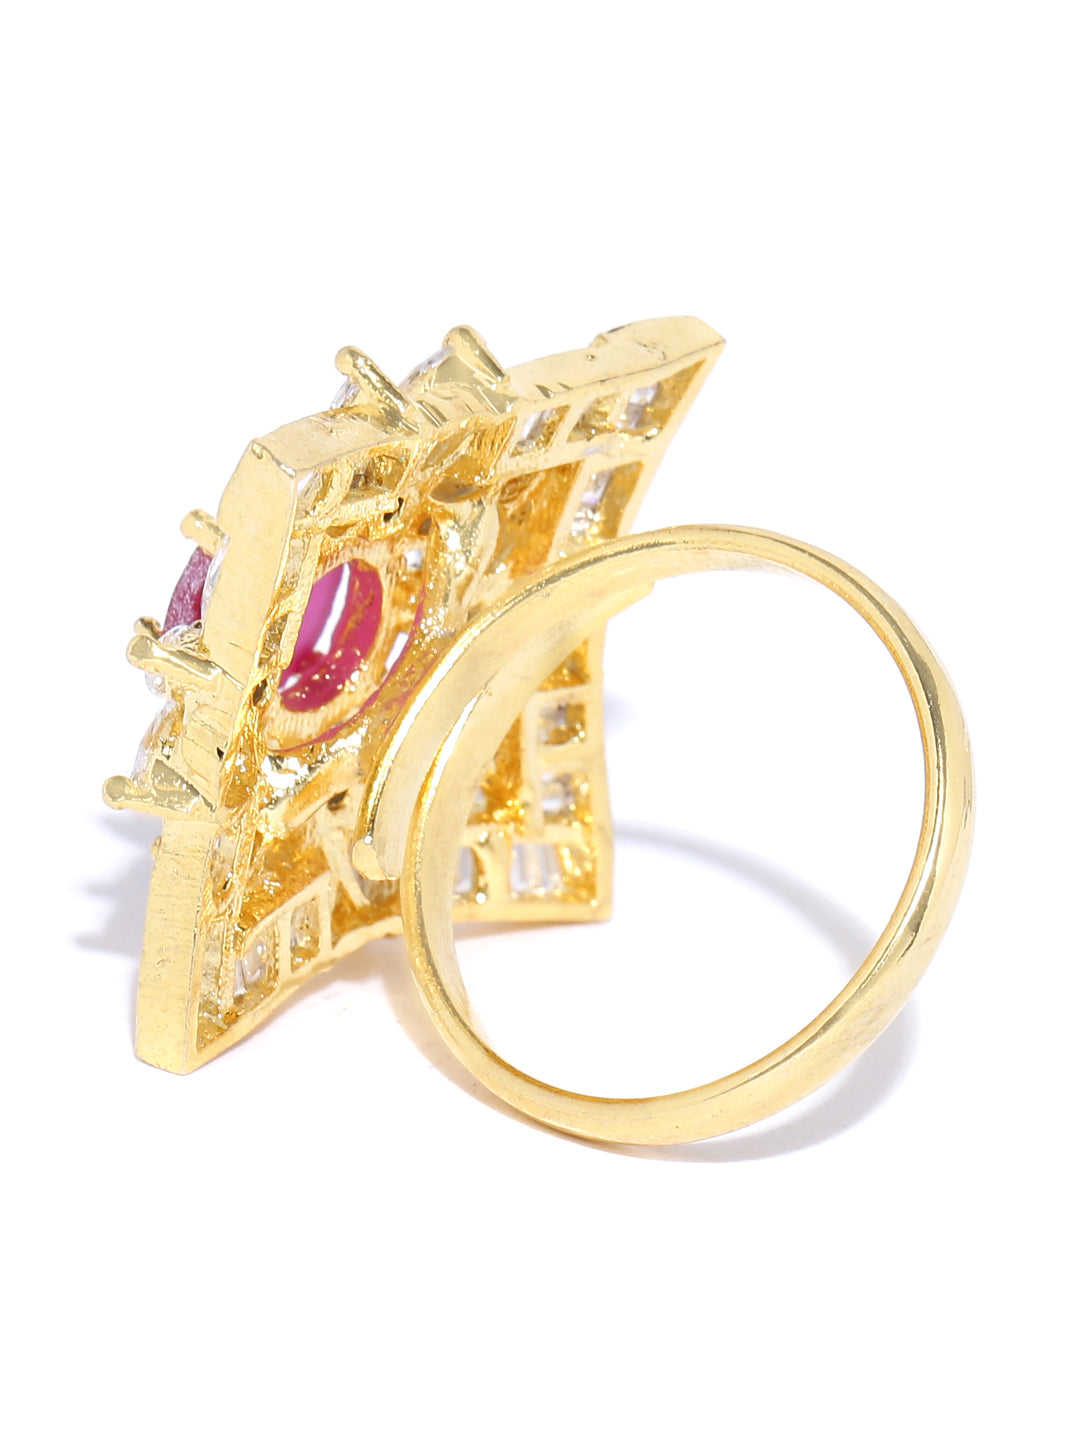 Gold-Plated American Diamond and Ruby Studded Adjustable Ring in Floral Pattern